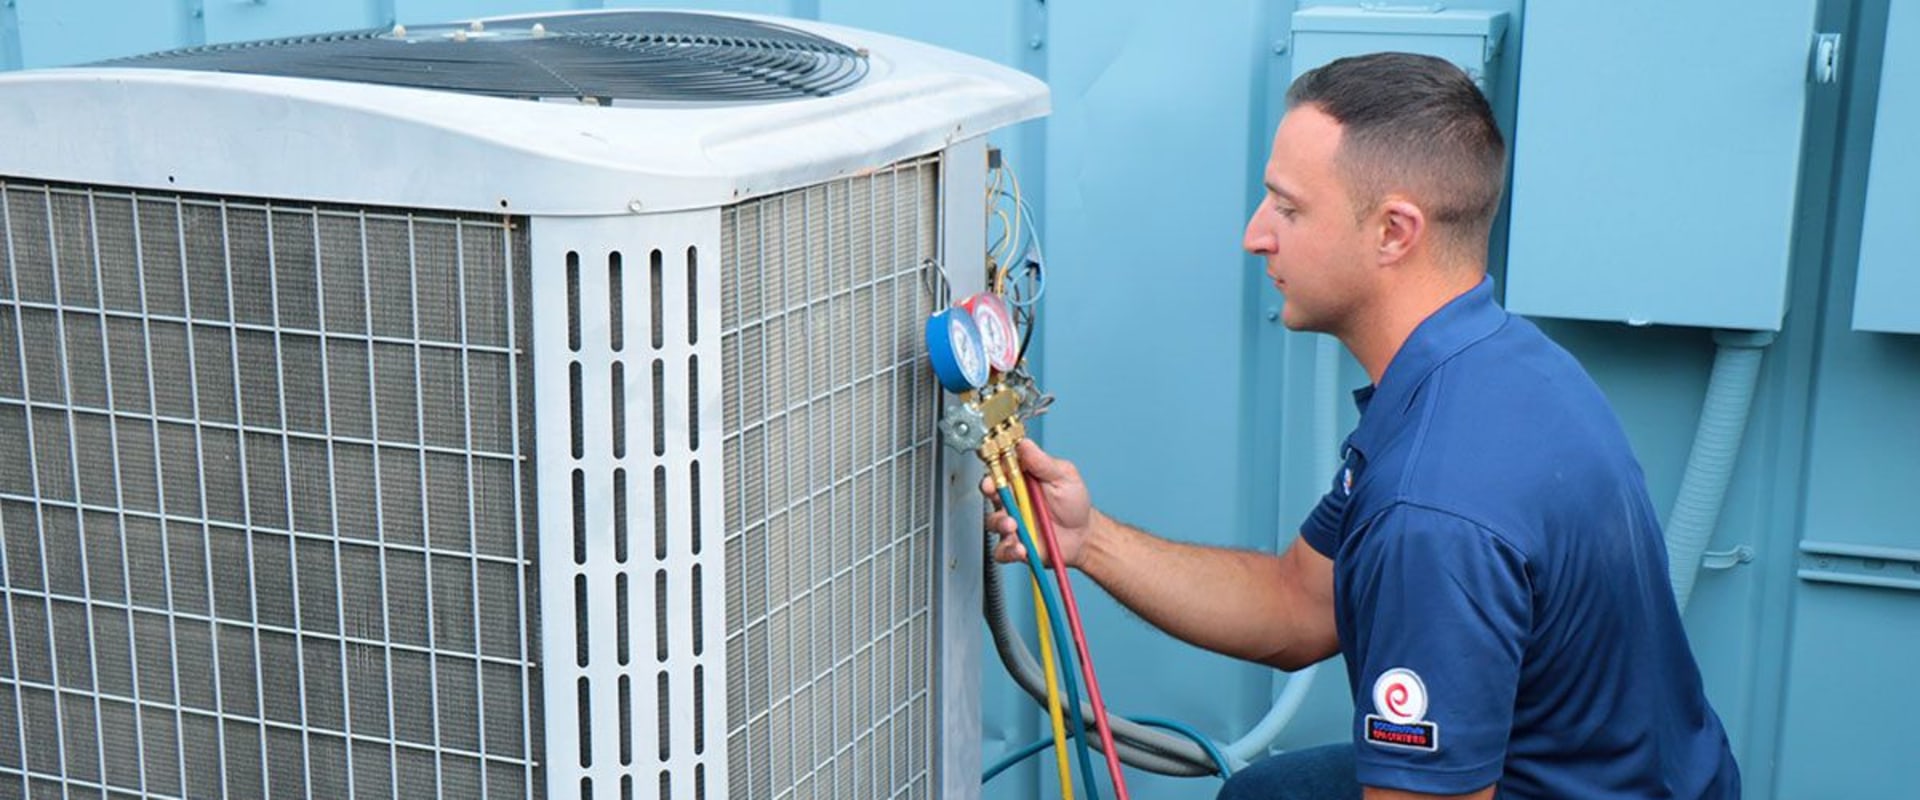 Does HVAC Maintenance in Coral Springs, FL Offer Installation and Repair of Humidifiers and Dehumidifiers?